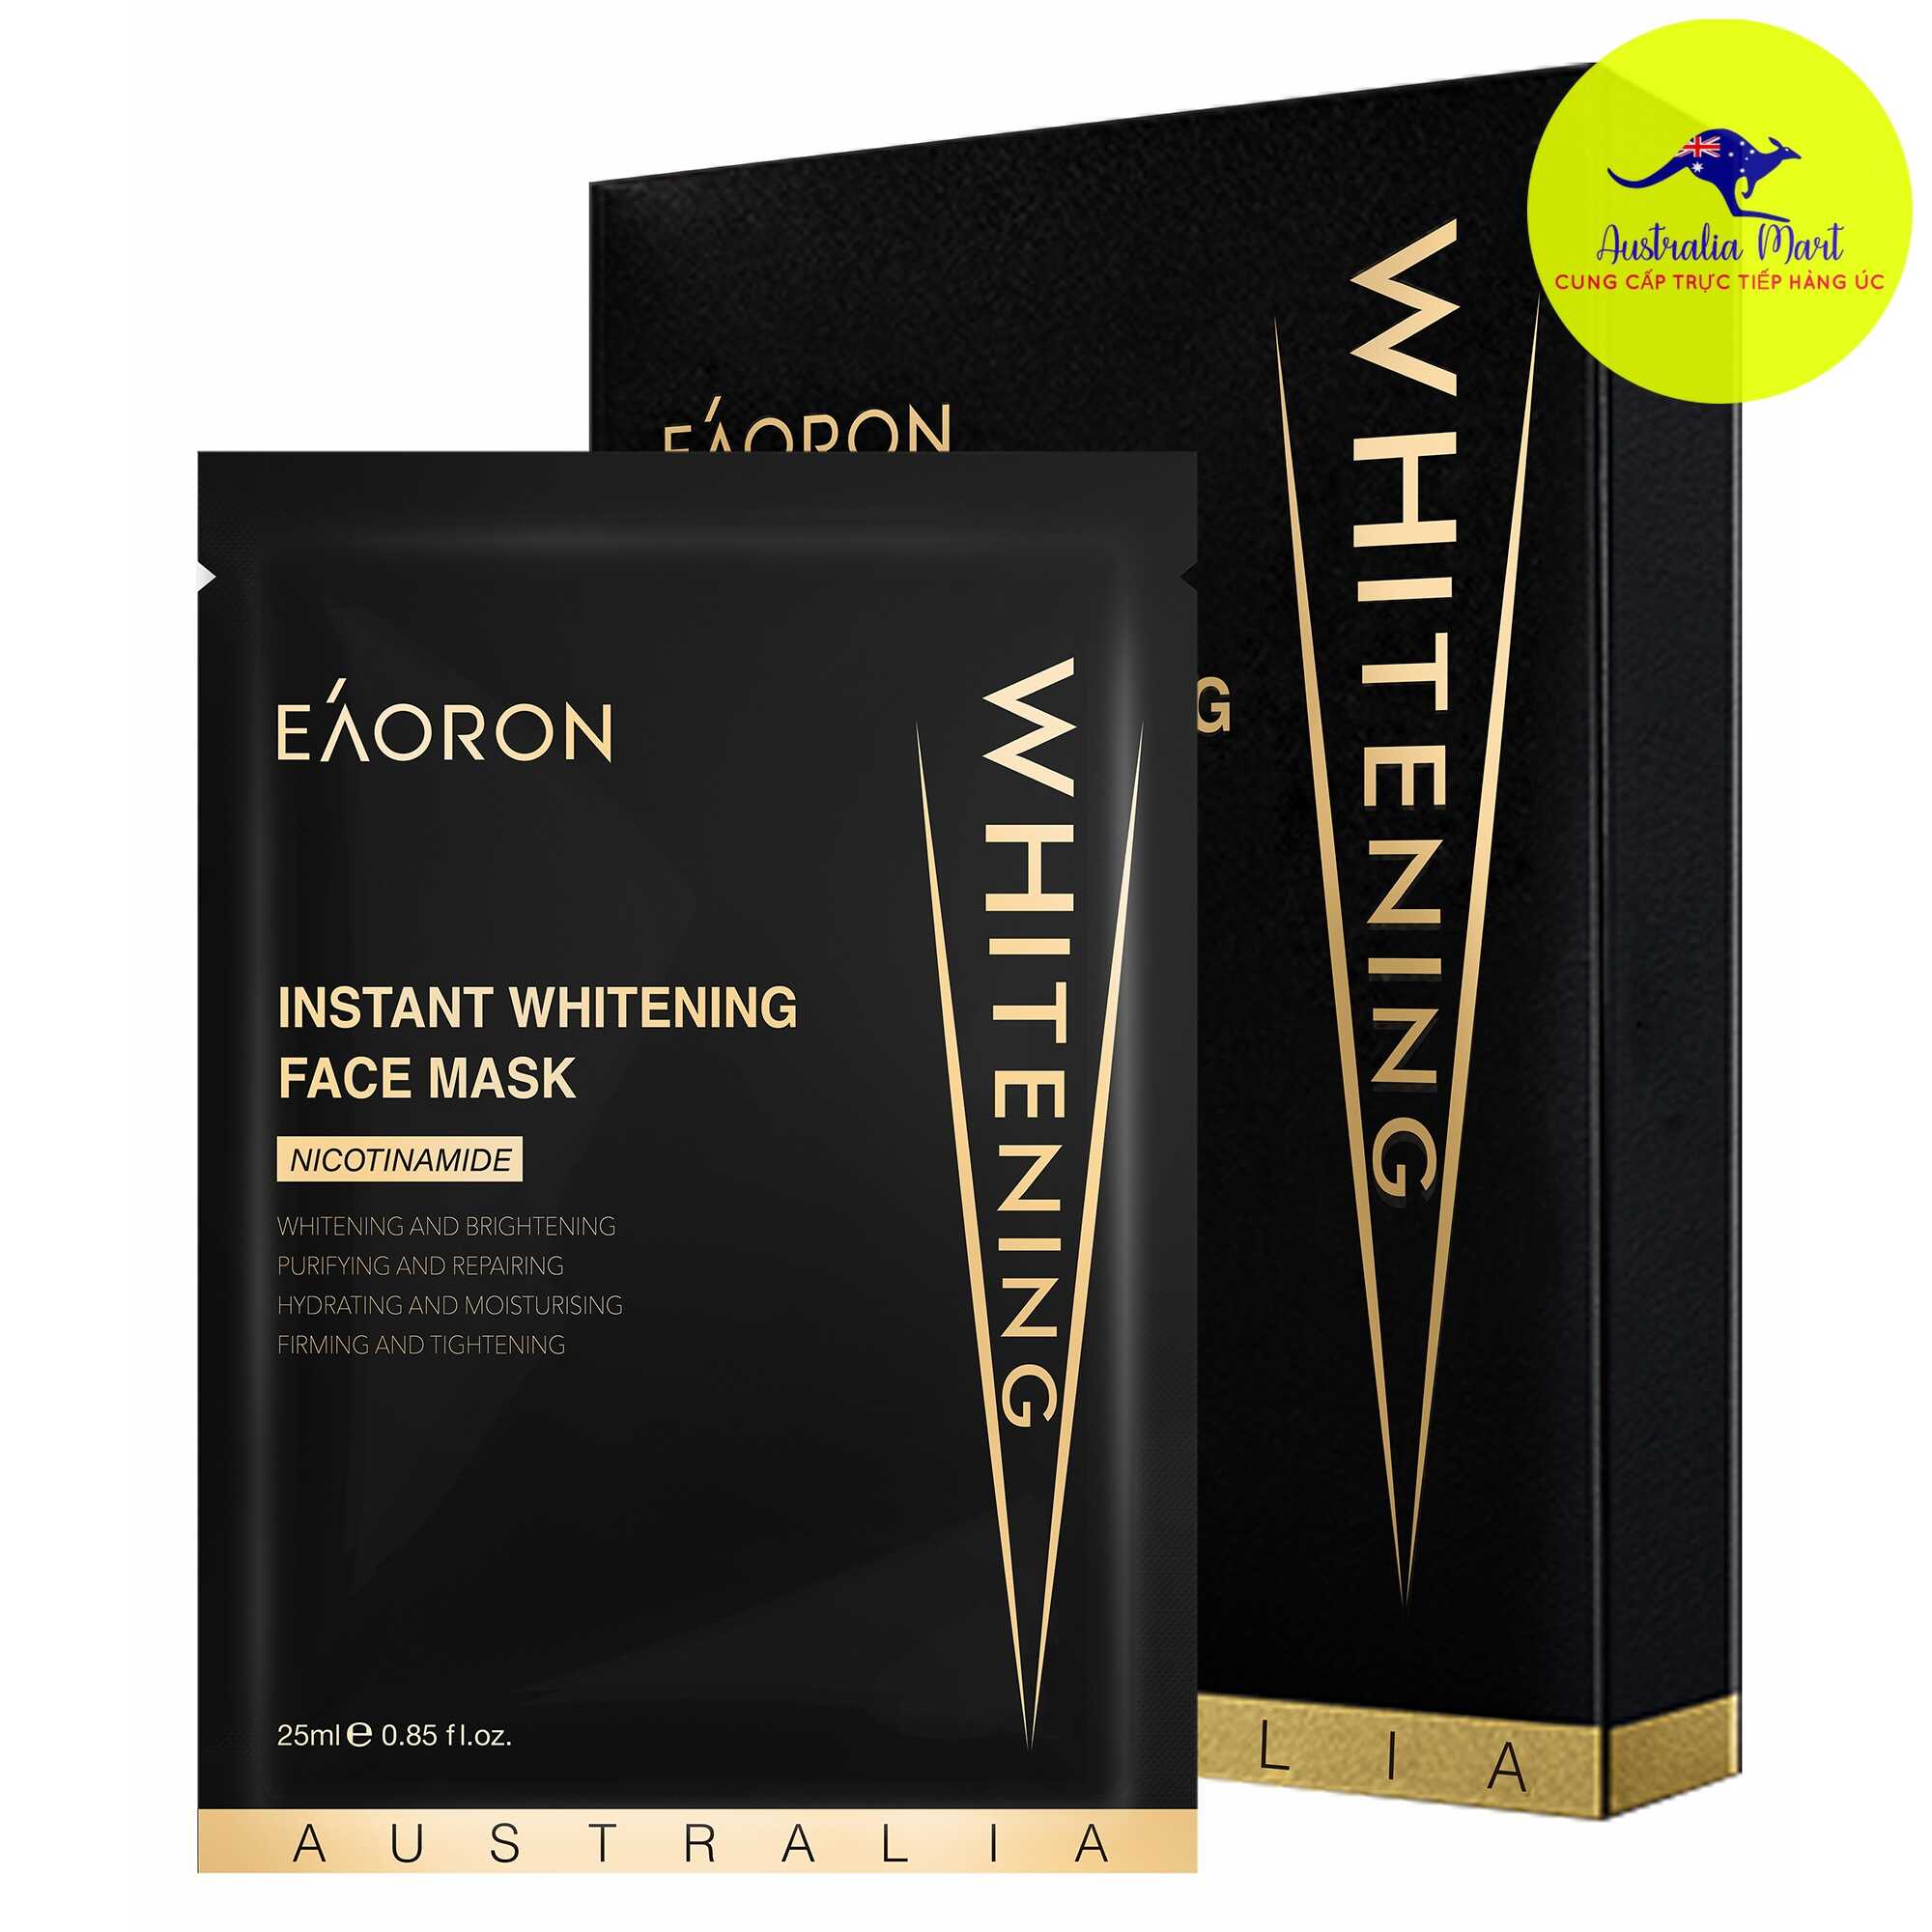 Mặt nạ dưỡng trắng da - Eaoron Instant Whitening Face Mask